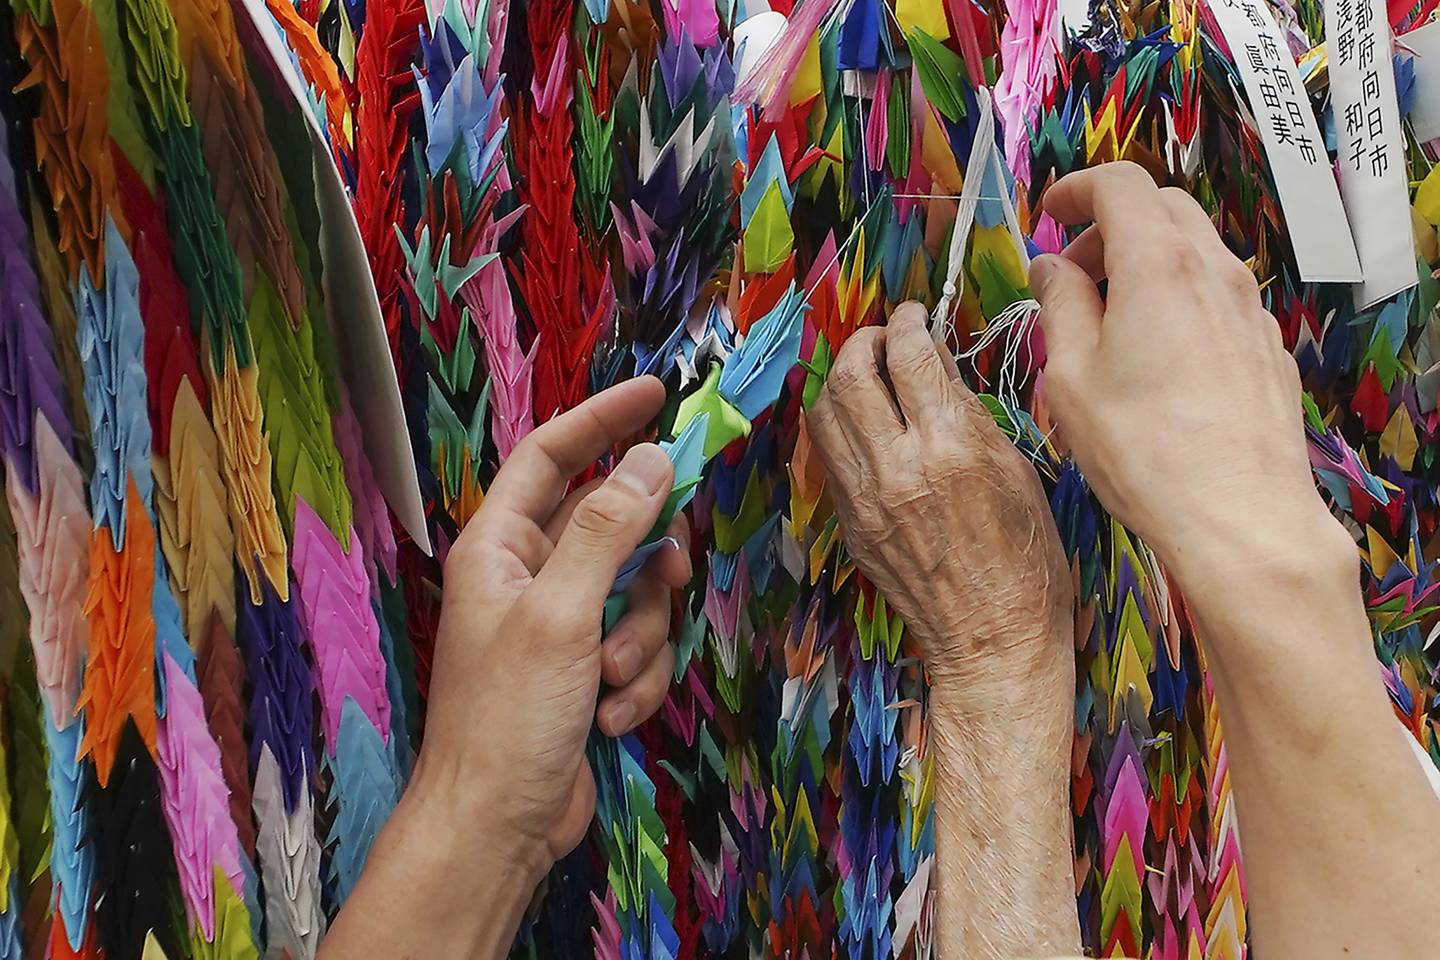 Hatsue Onda, center, is helped by Kengo Onda to offer strings of colorful paper cranes to the victims of the 1945 Atomic bombing near Hiroshima Peace Memorial Museum in Hiroshima, Japan, Monday, Aug. 3, 2020.